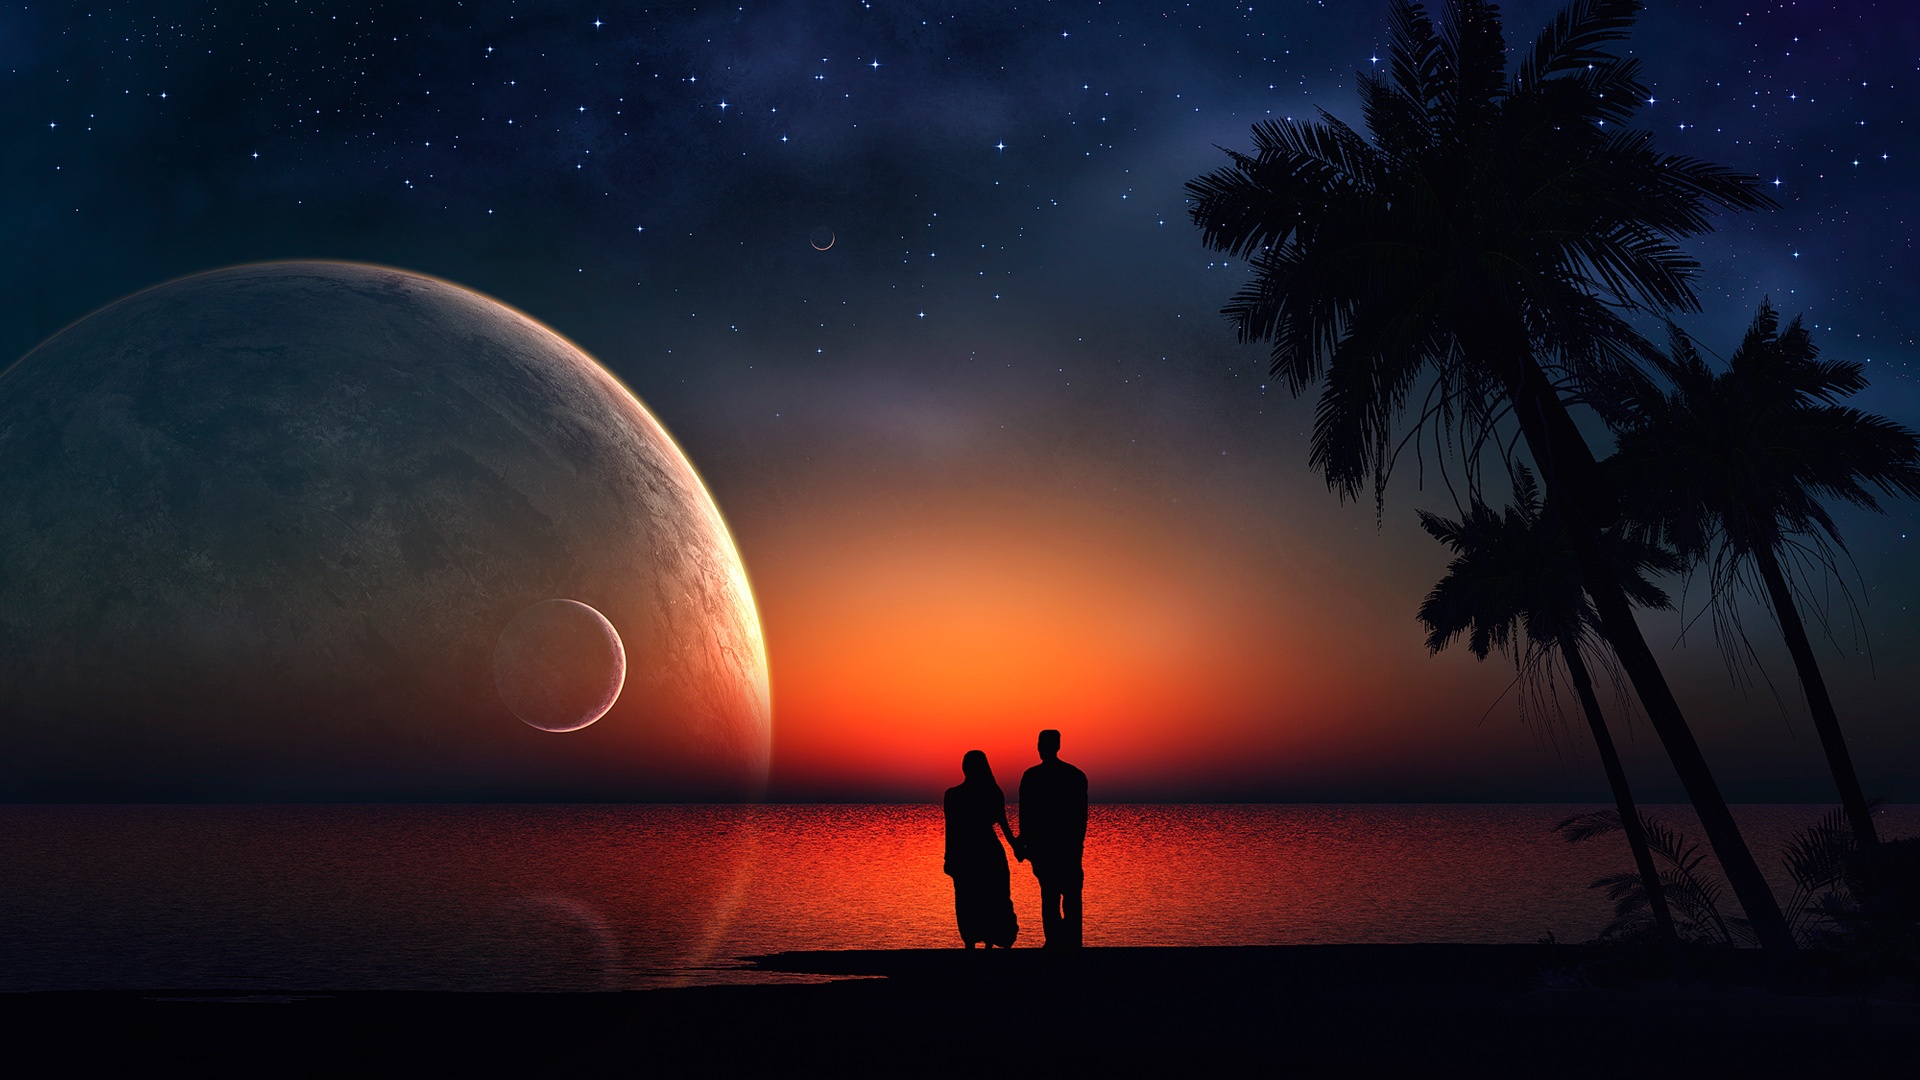 Romantic Backgrounds Download Free 